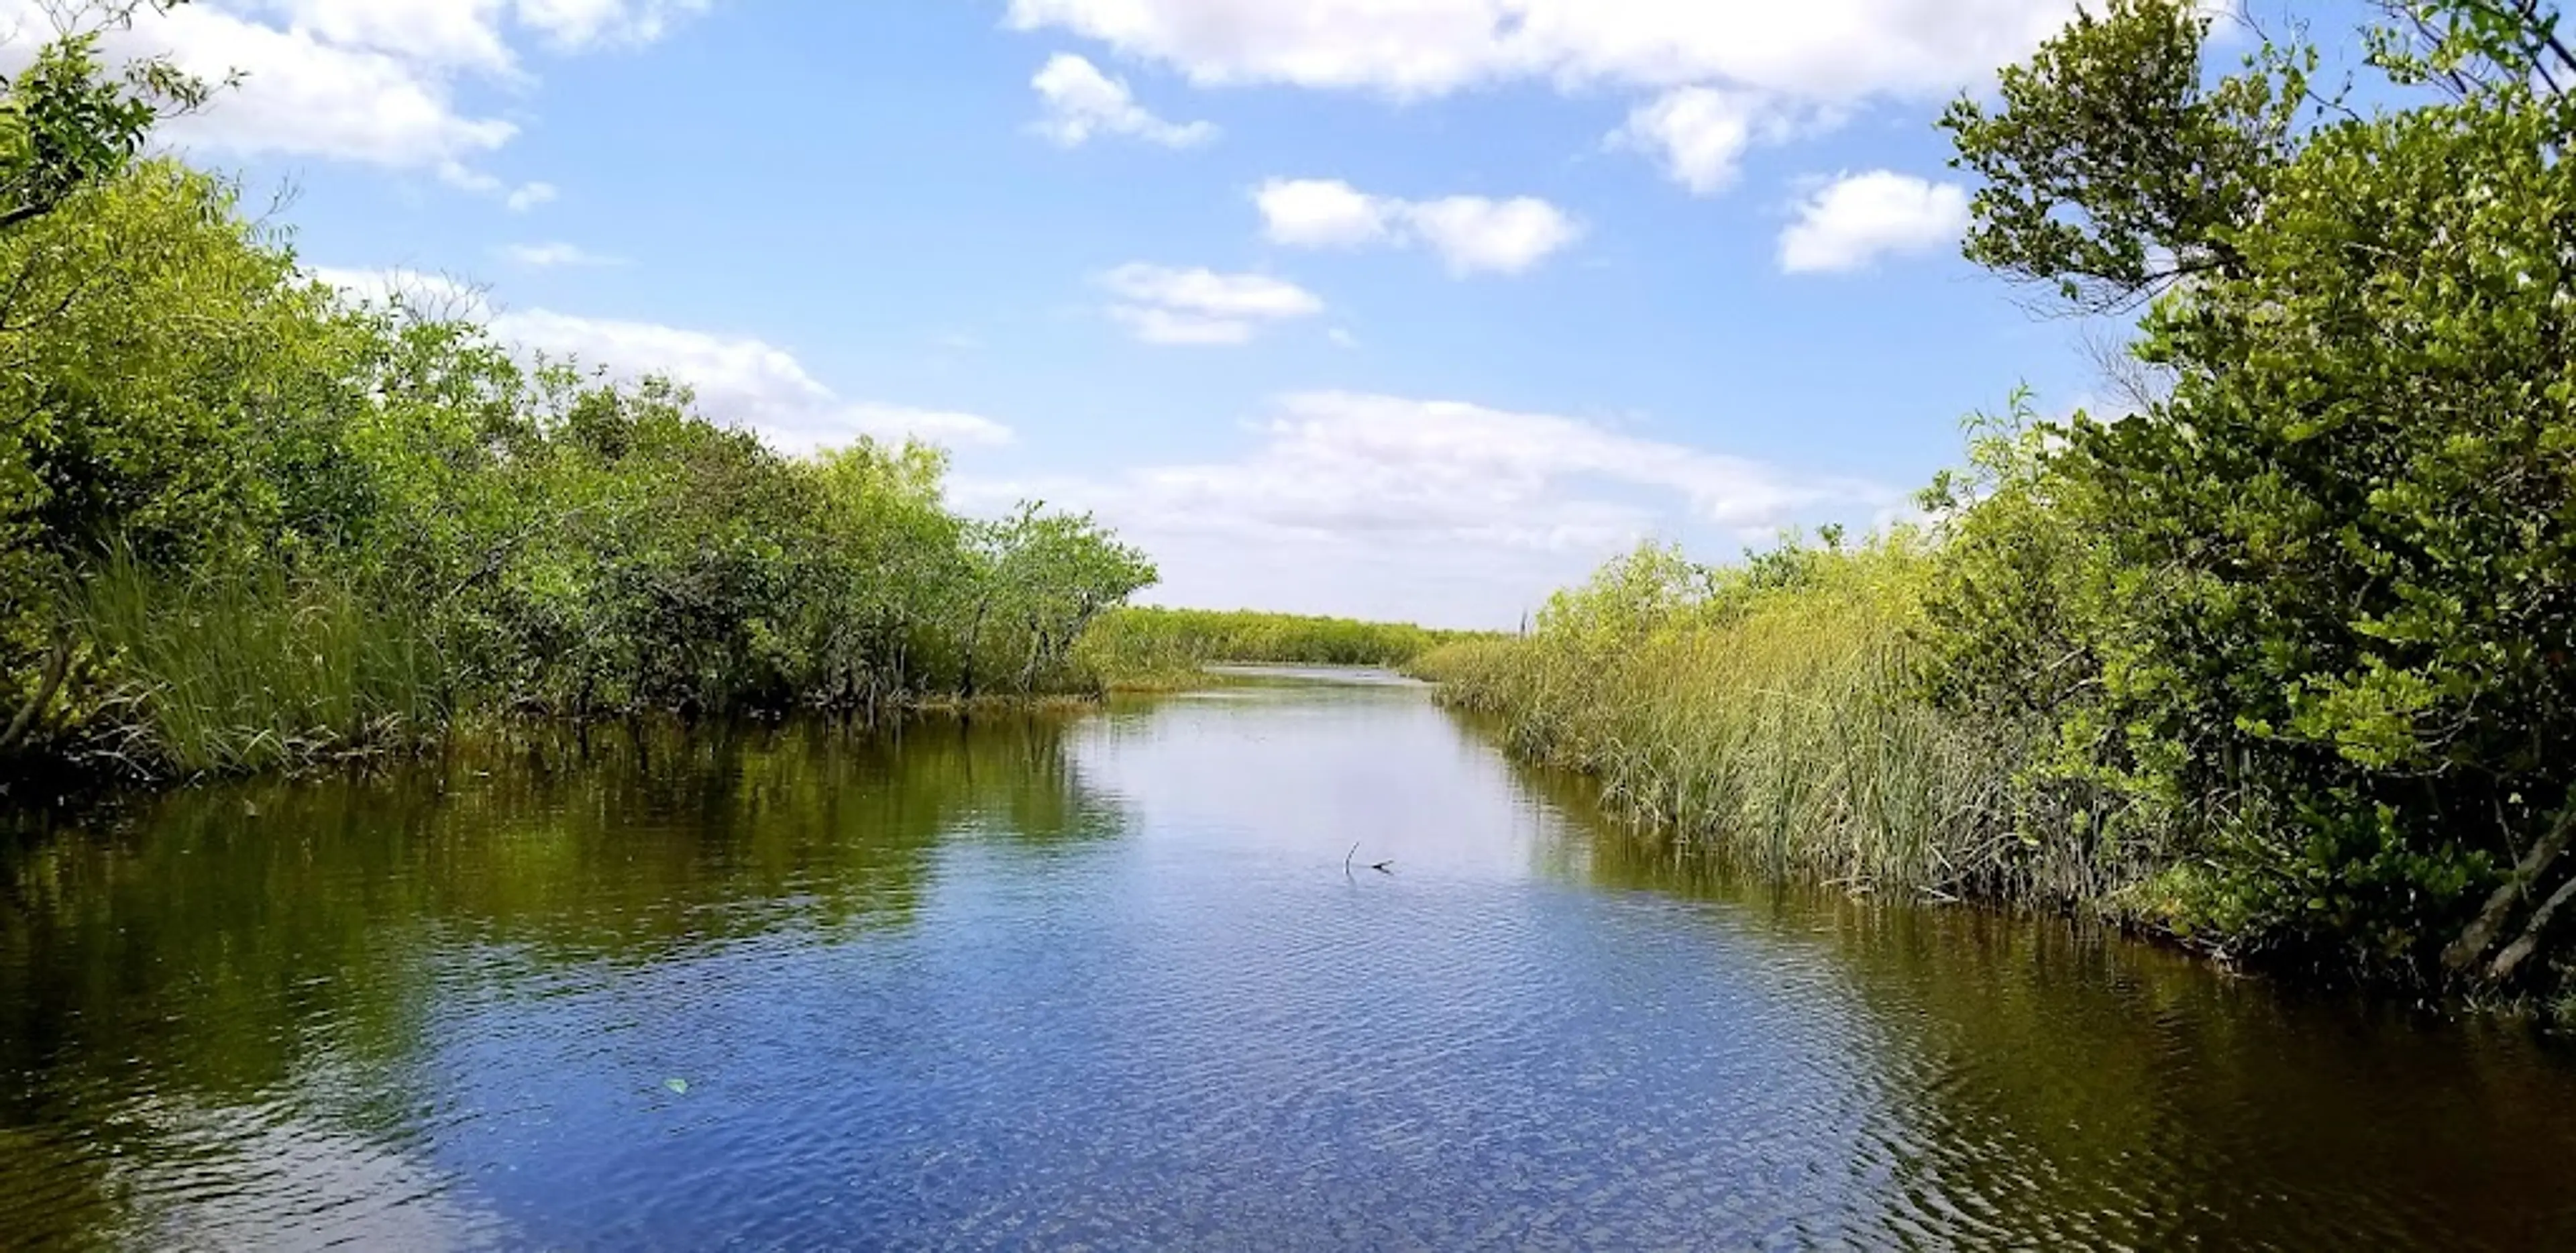 Guided tour of the Everglades